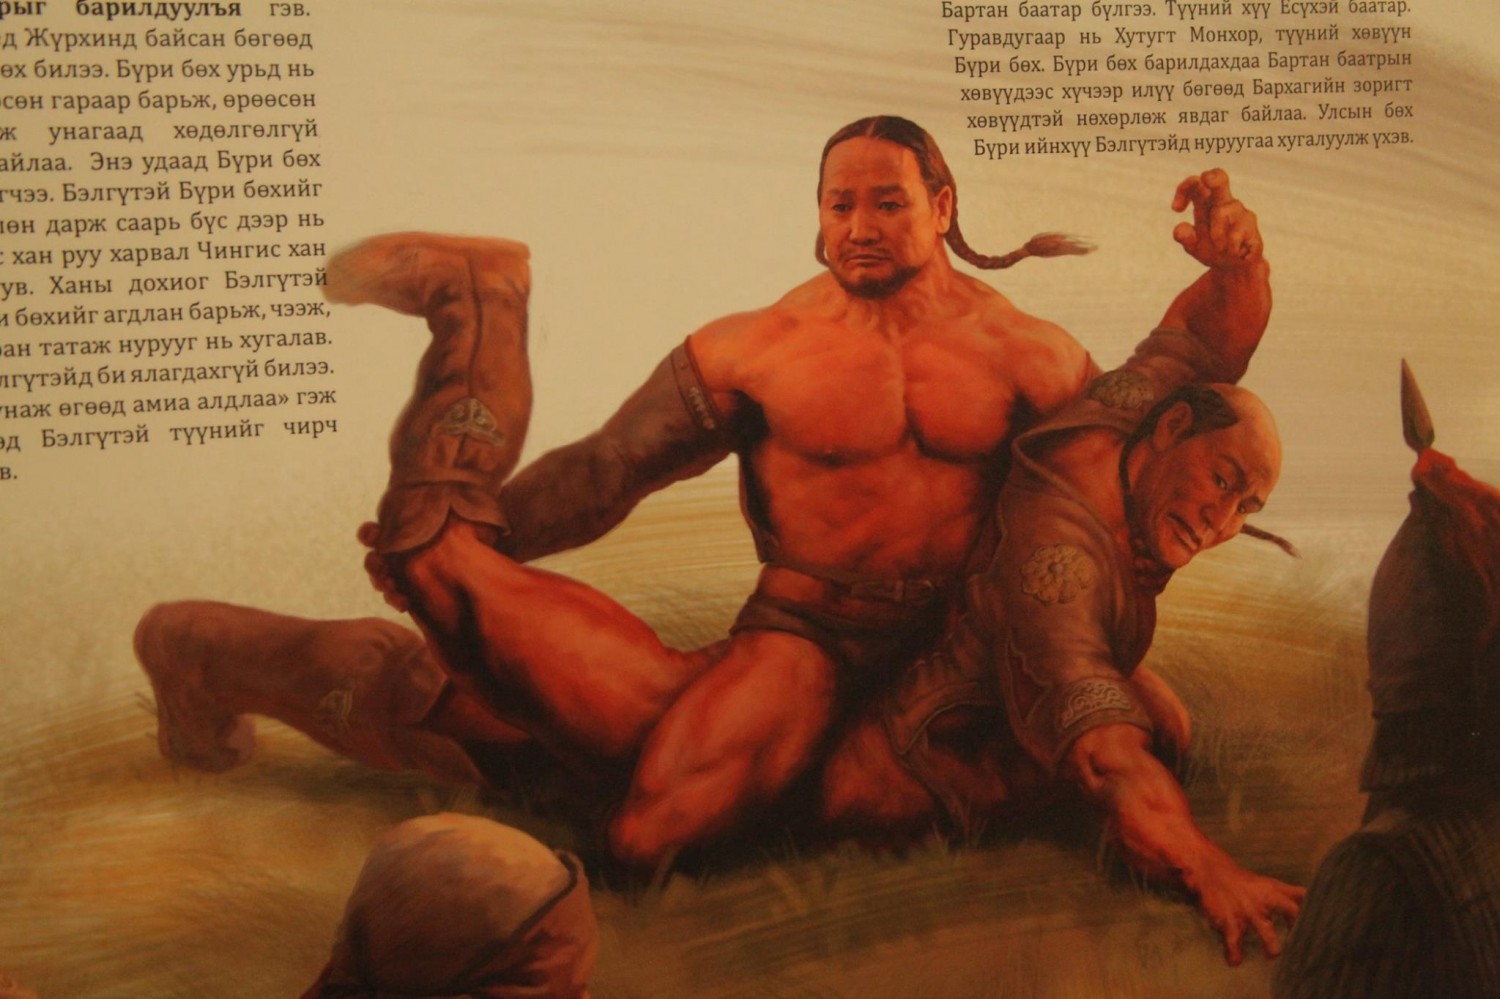 "The Secret History of Mongolia" book with illustration